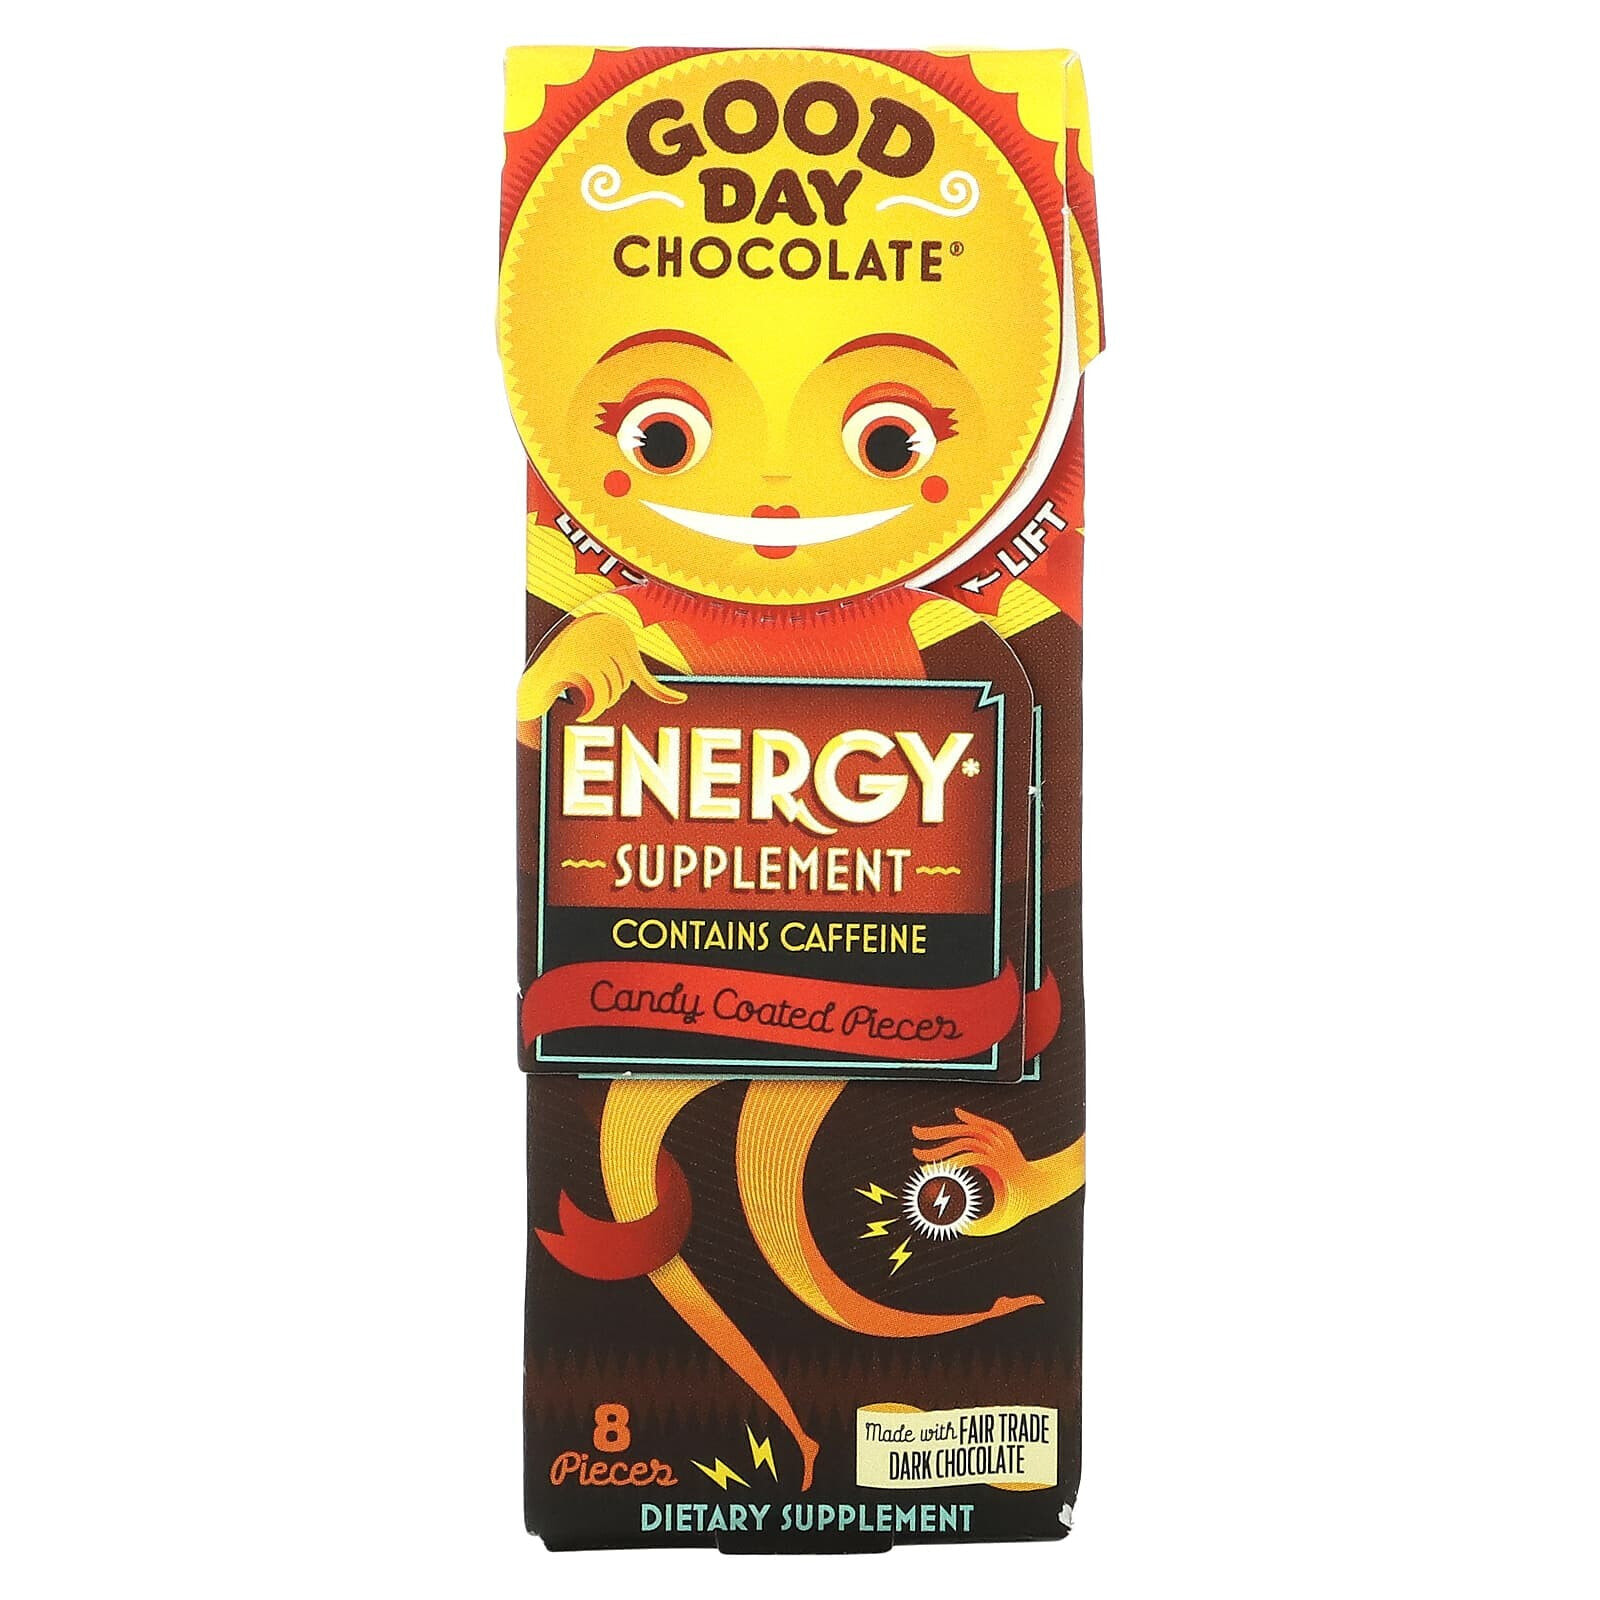 Good Day Chocolate, Energy Supplement, 8 Candy Coated Pieces